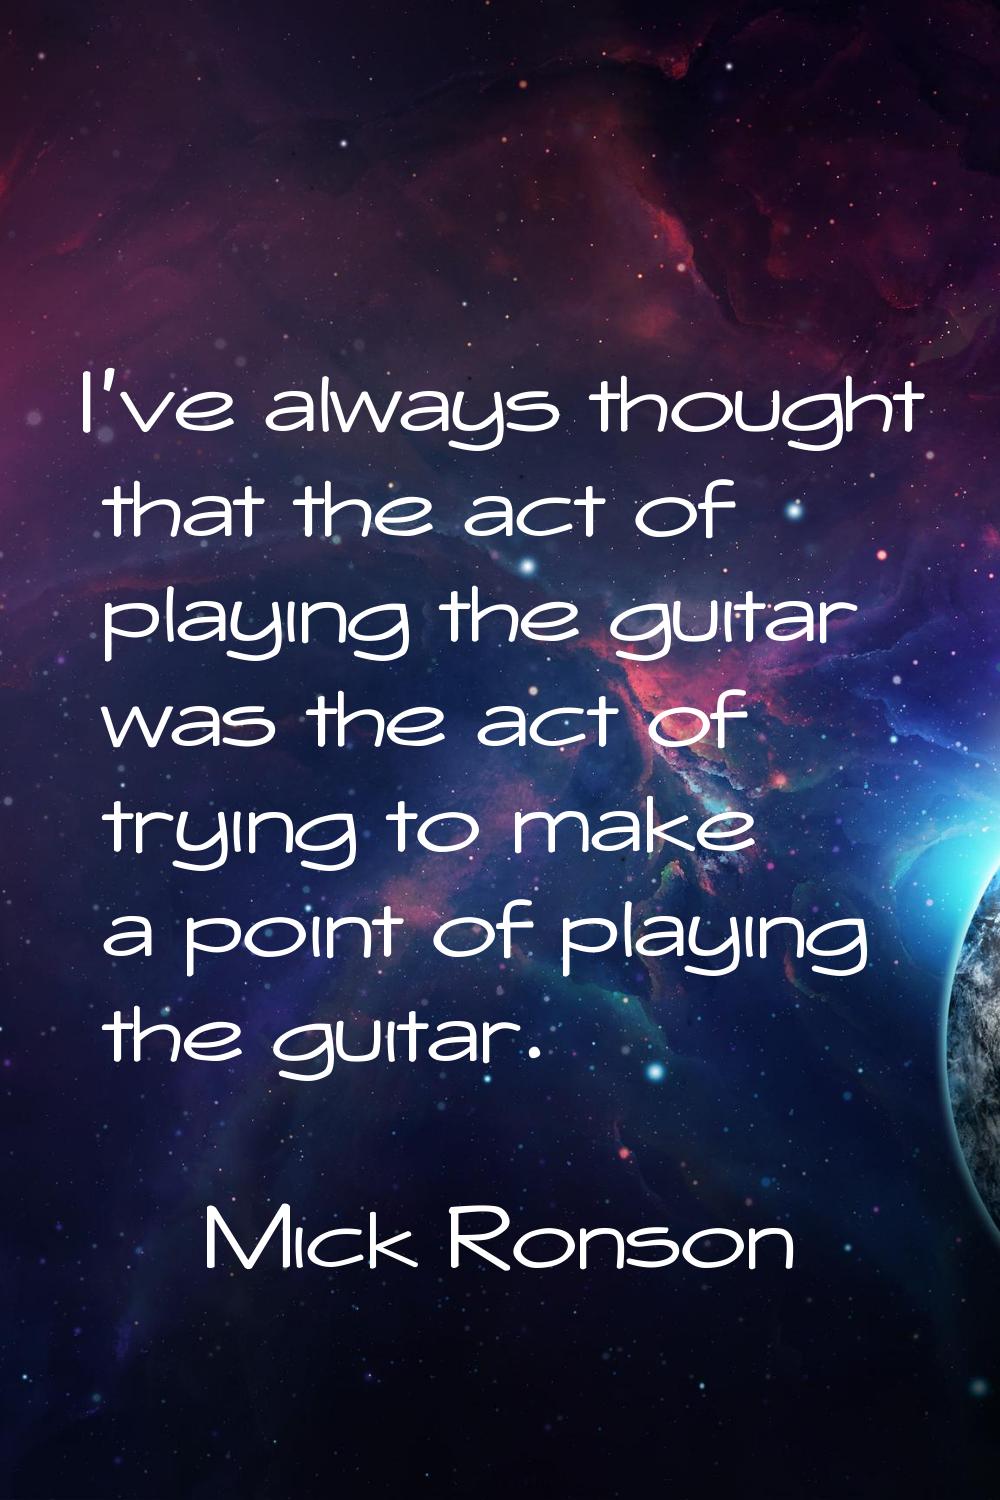 I've always thought that the act of playing the guitar was the act of trying to make a point of pla